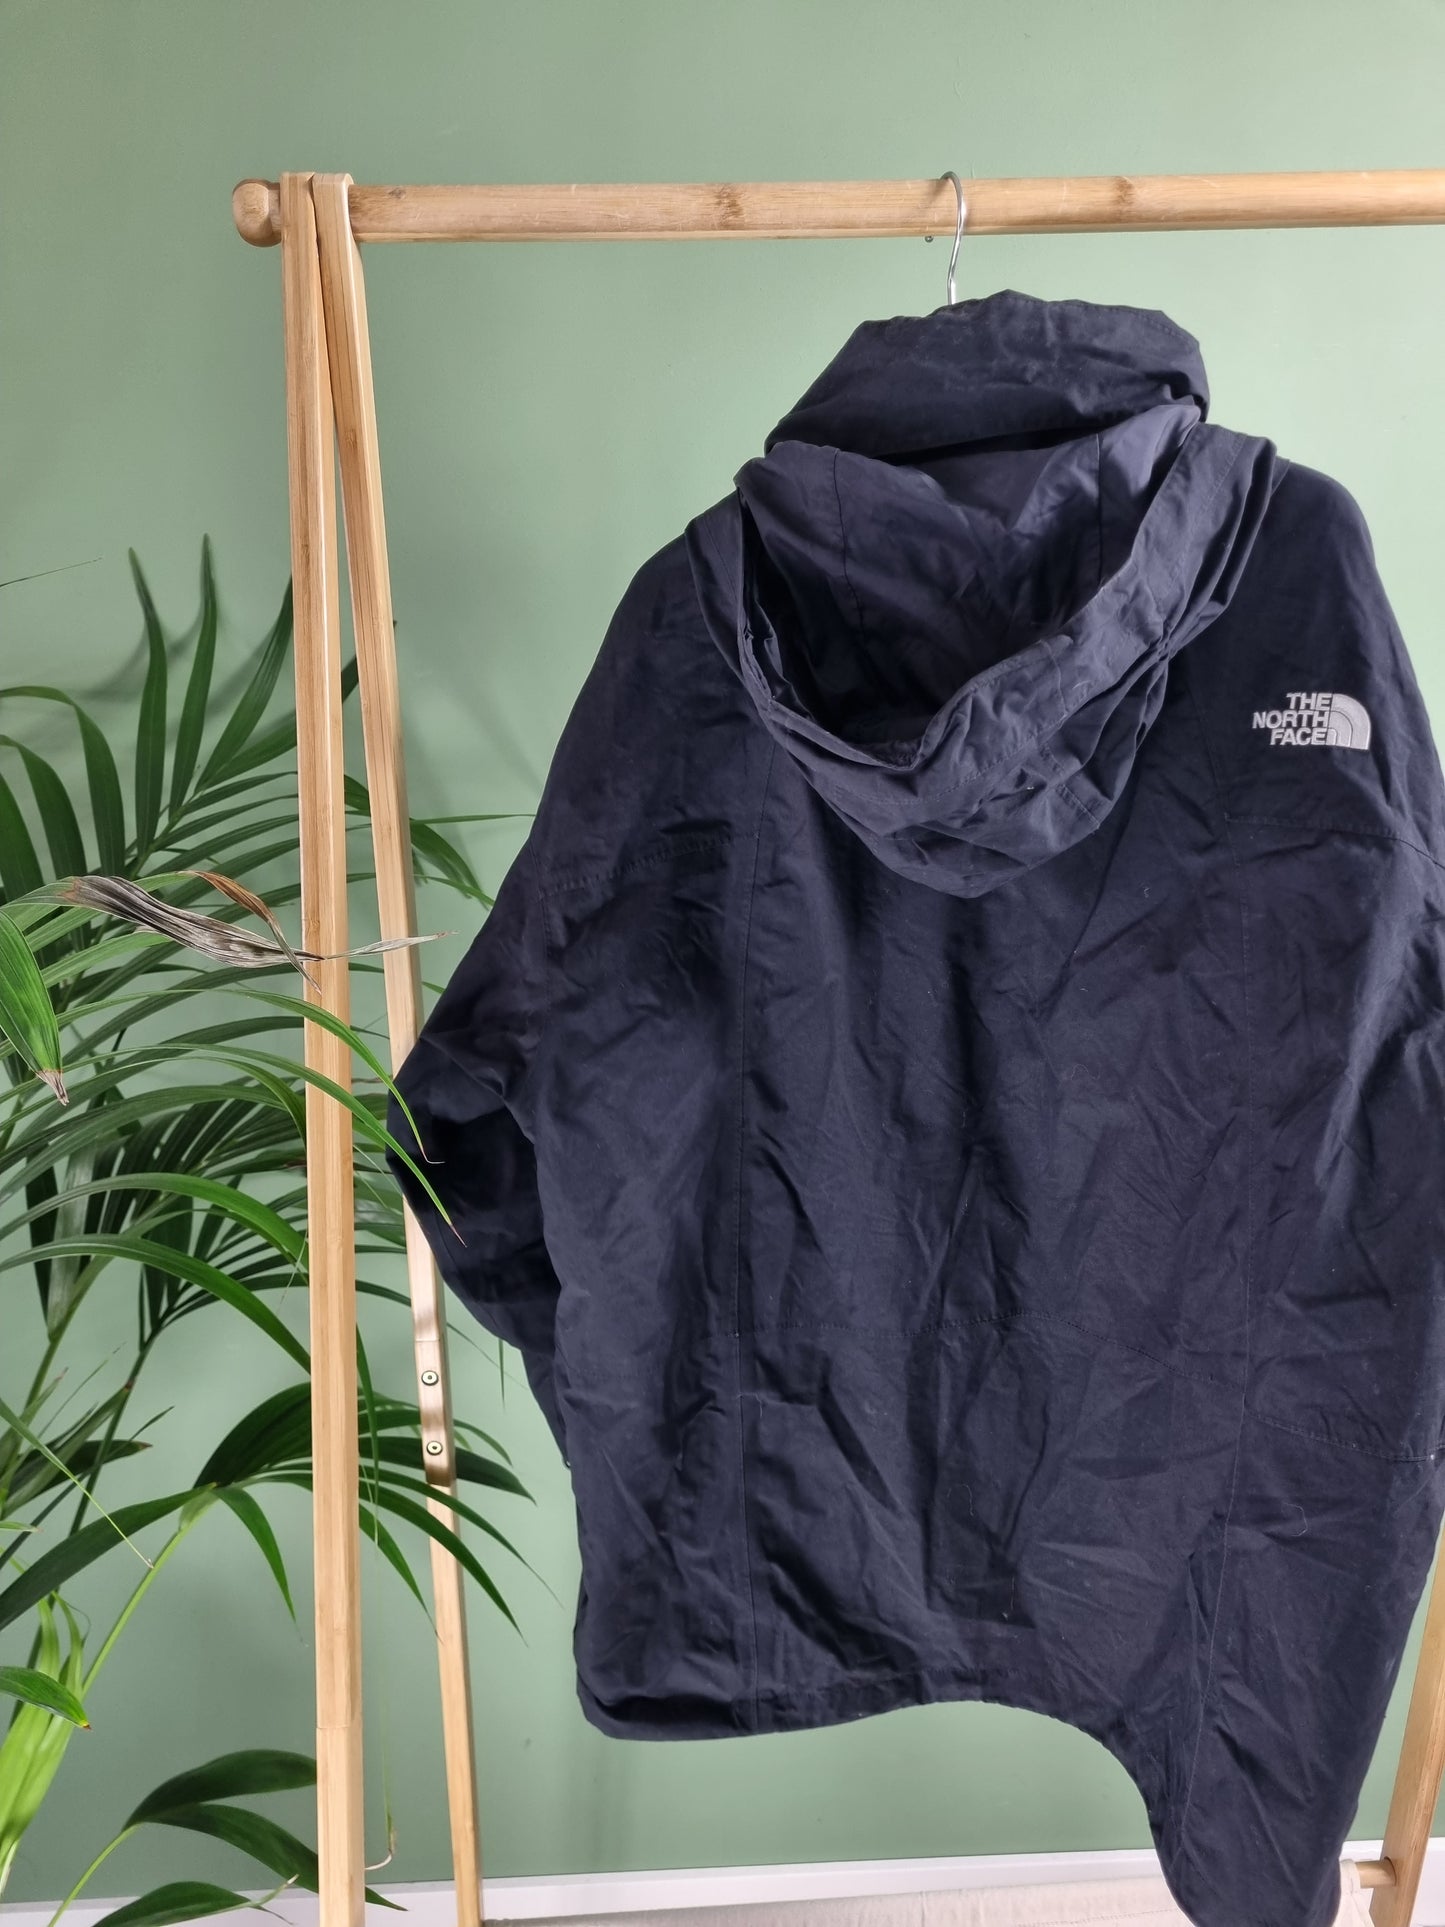 The North Face jas maat XXL